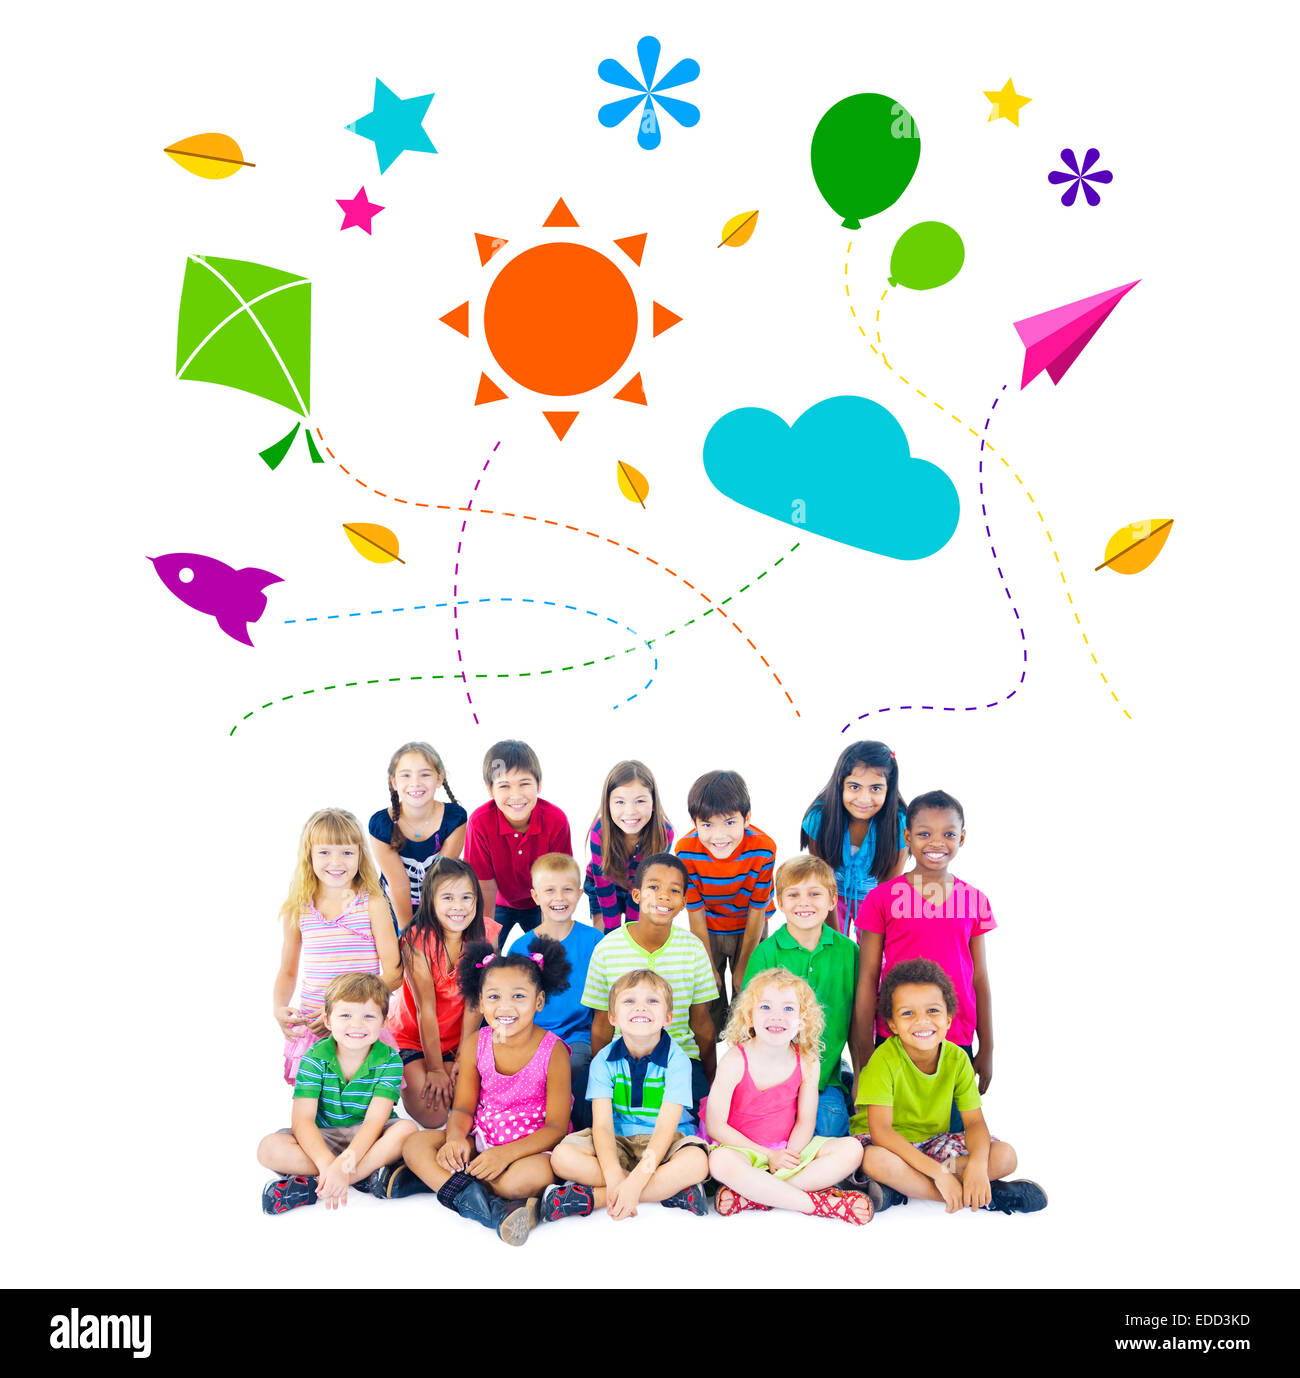 Group of Children and Playful Symbols Stock Photo